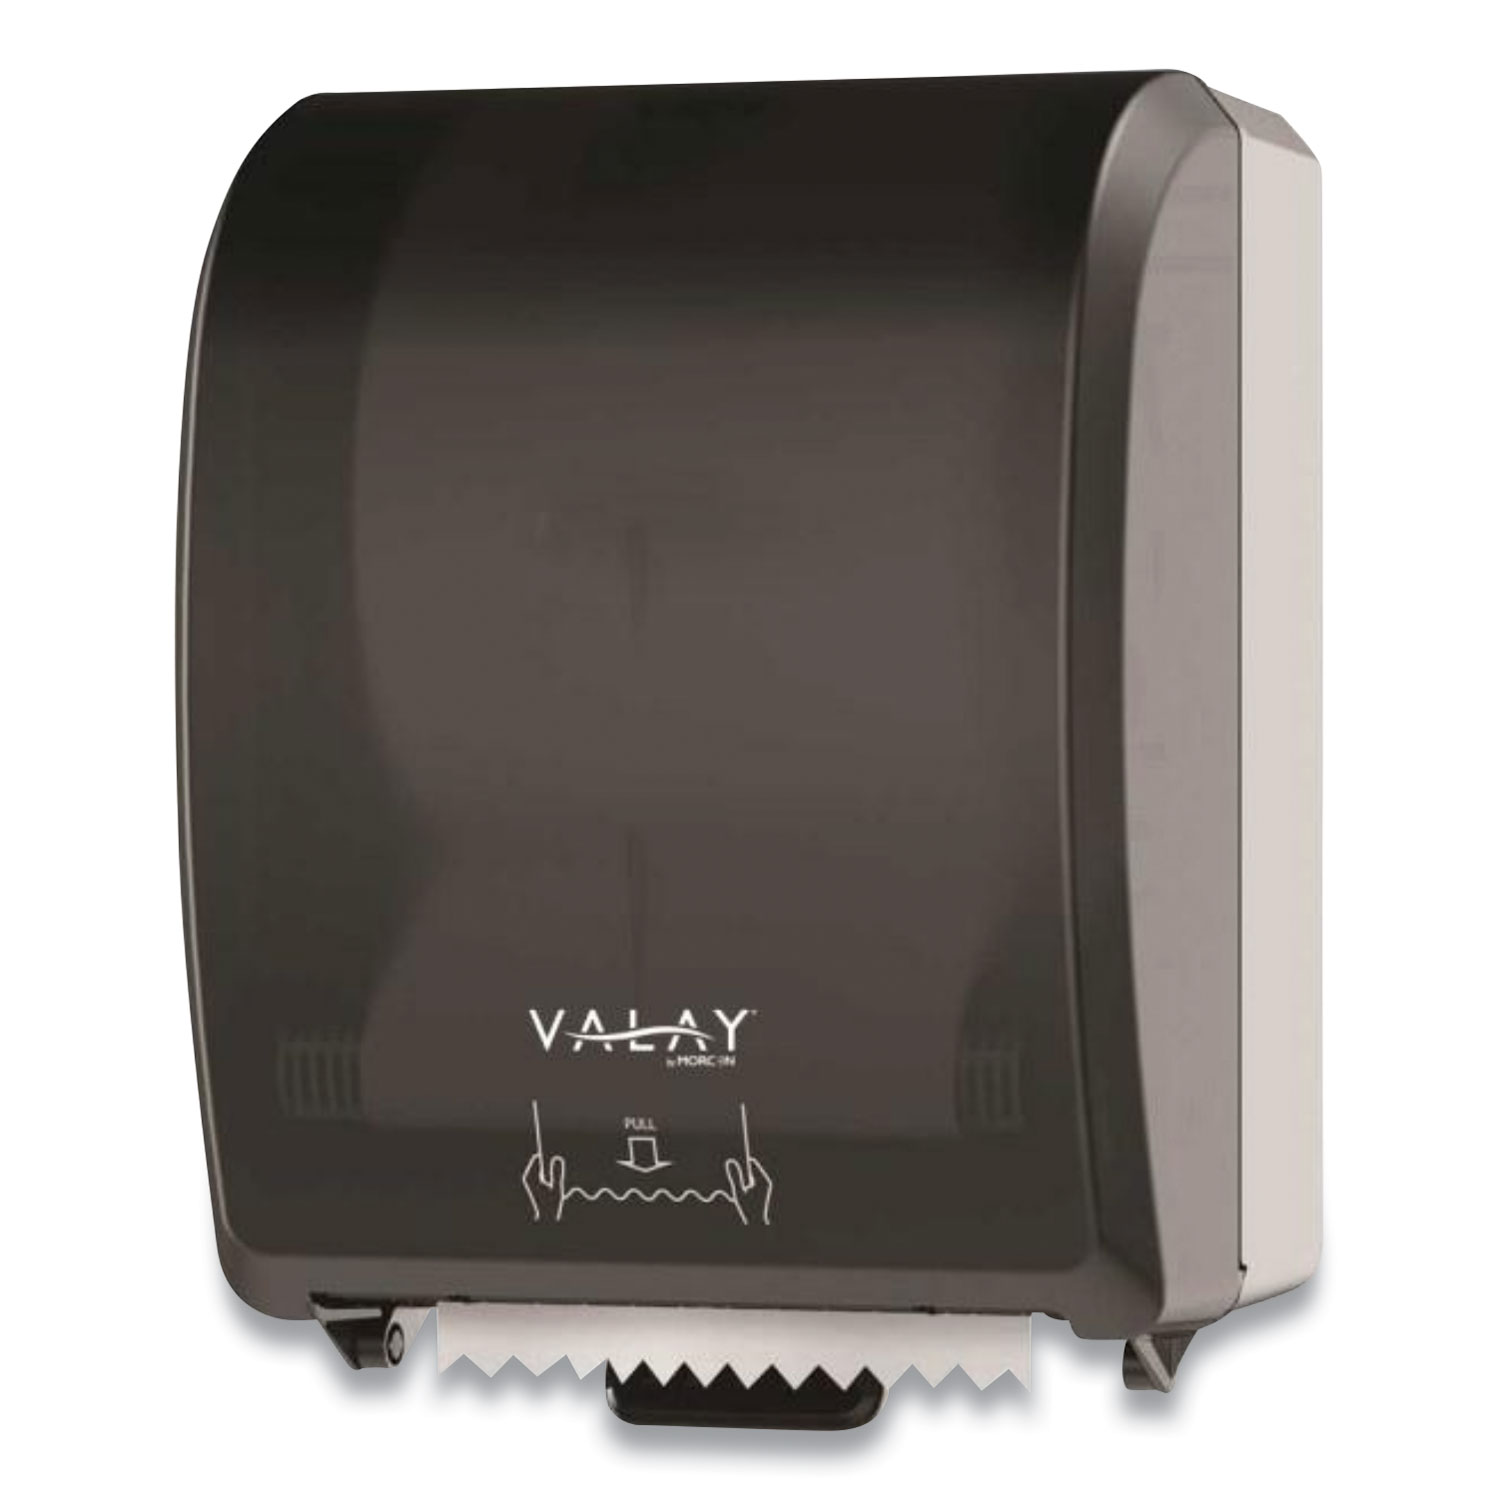  Morcon Tissue Y2500 Valay Controlled Towel Dispenser, Y-Notch, 12.3 x 9.3 x 15.9, Black (MORY2500) 